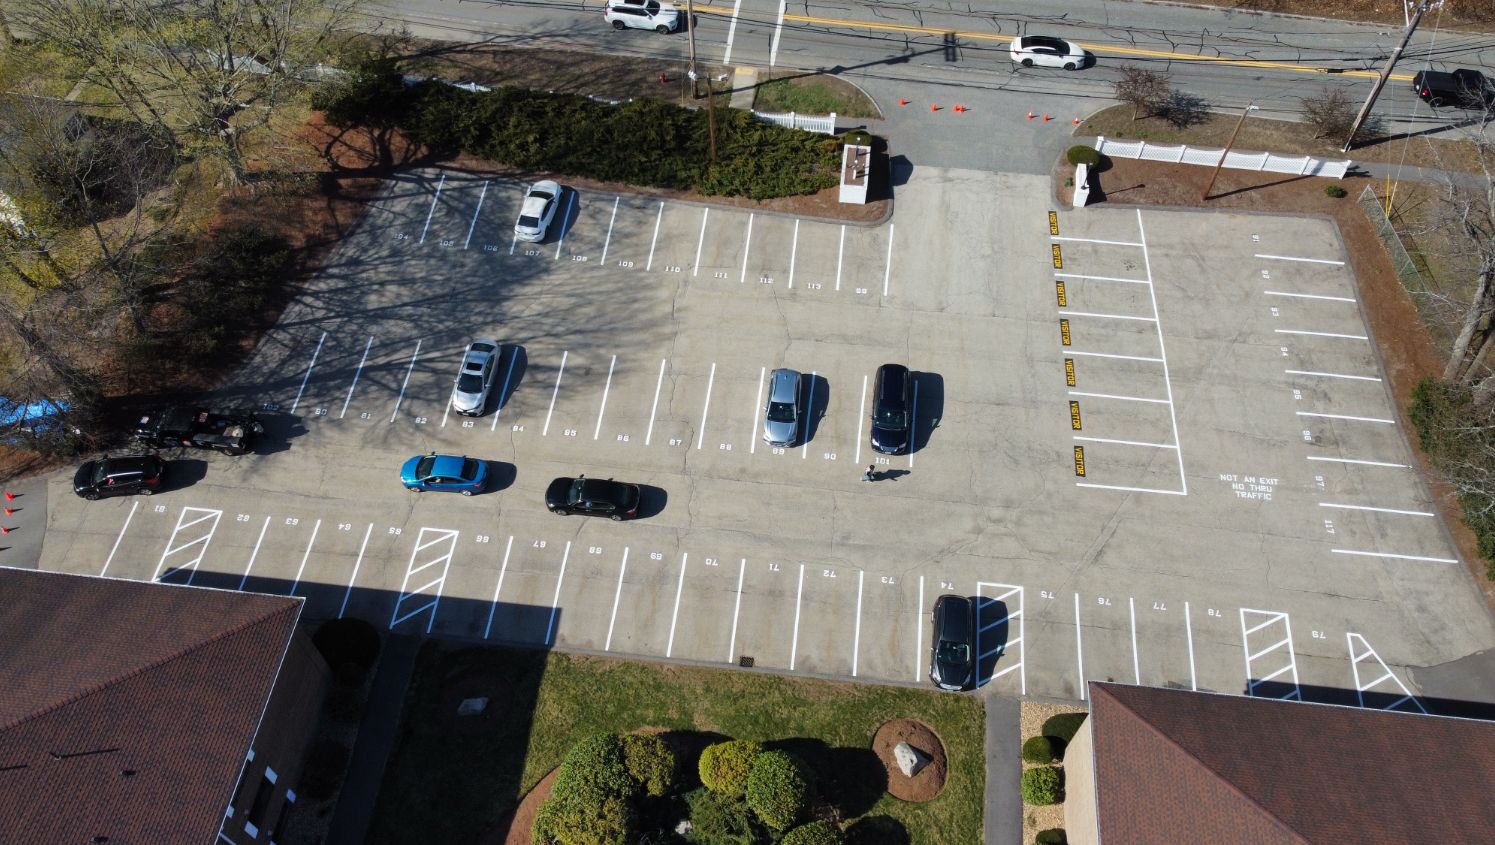 an aerial view of numbered parking spaces